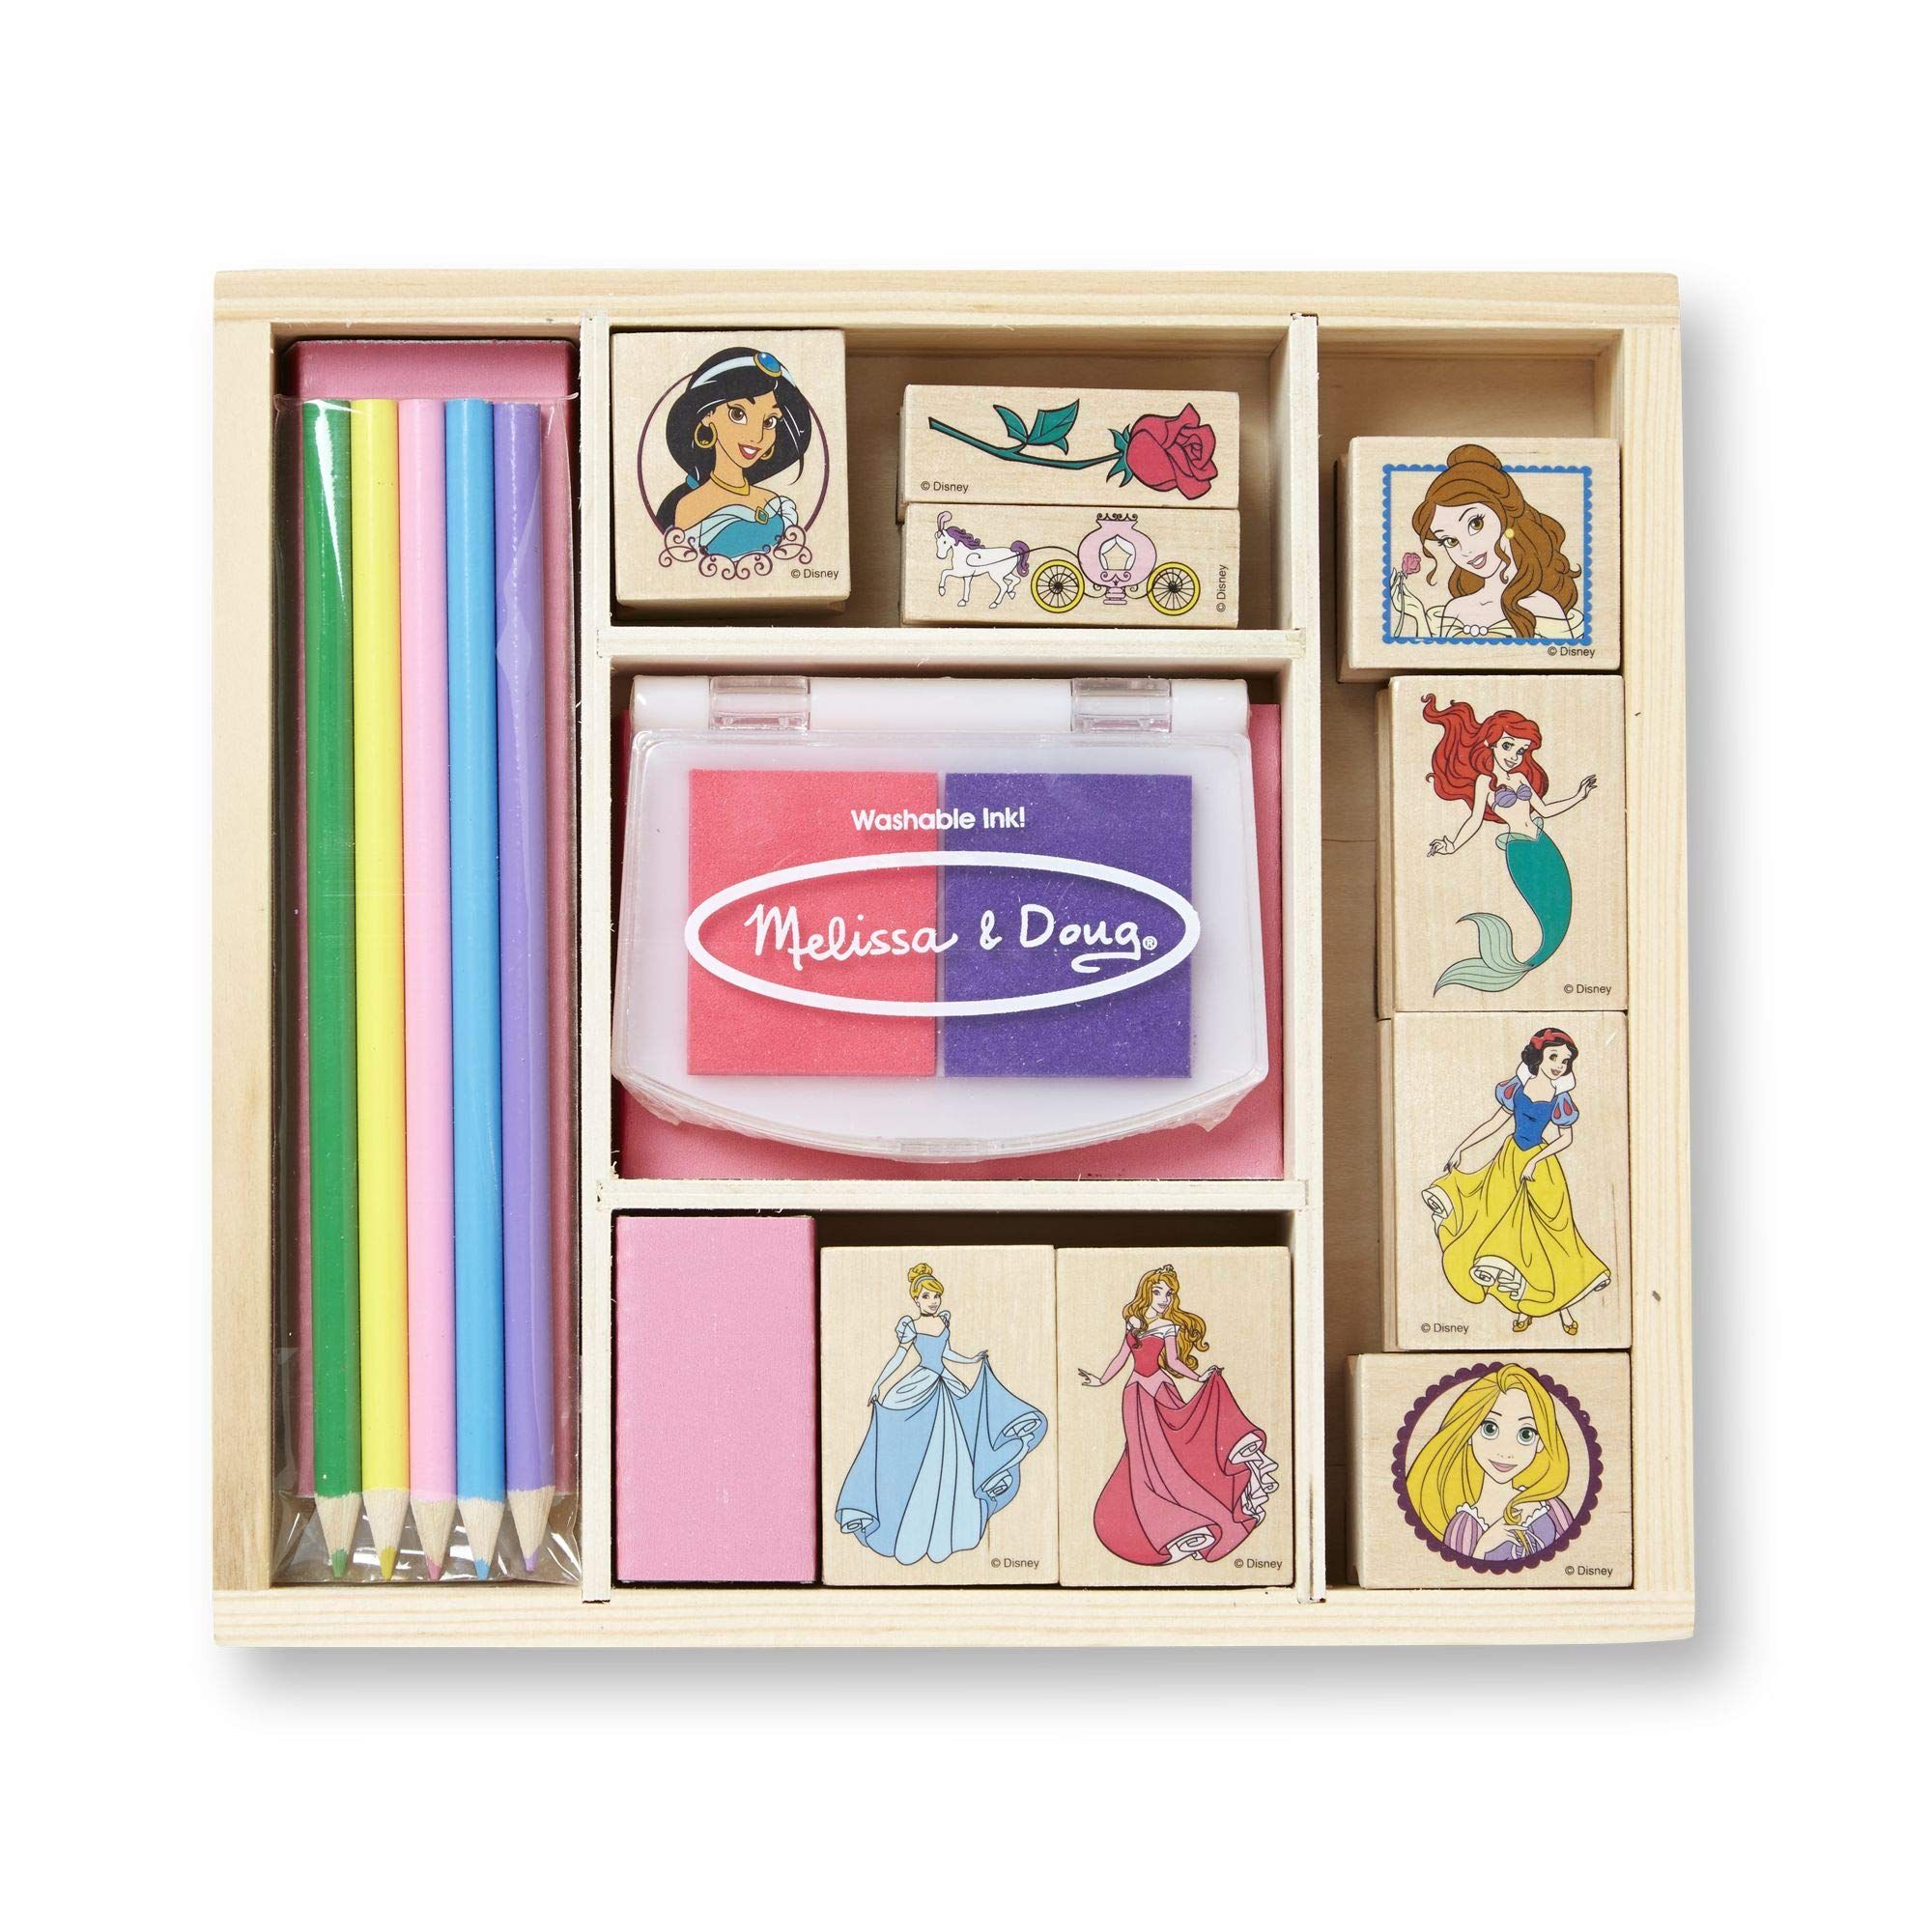 Melissa & Doug Disney Princess Wooden Stamp Set: 9 Stamps, 5 Colored Pencils, and 2-Color Stamp Pad | Amazon (US)